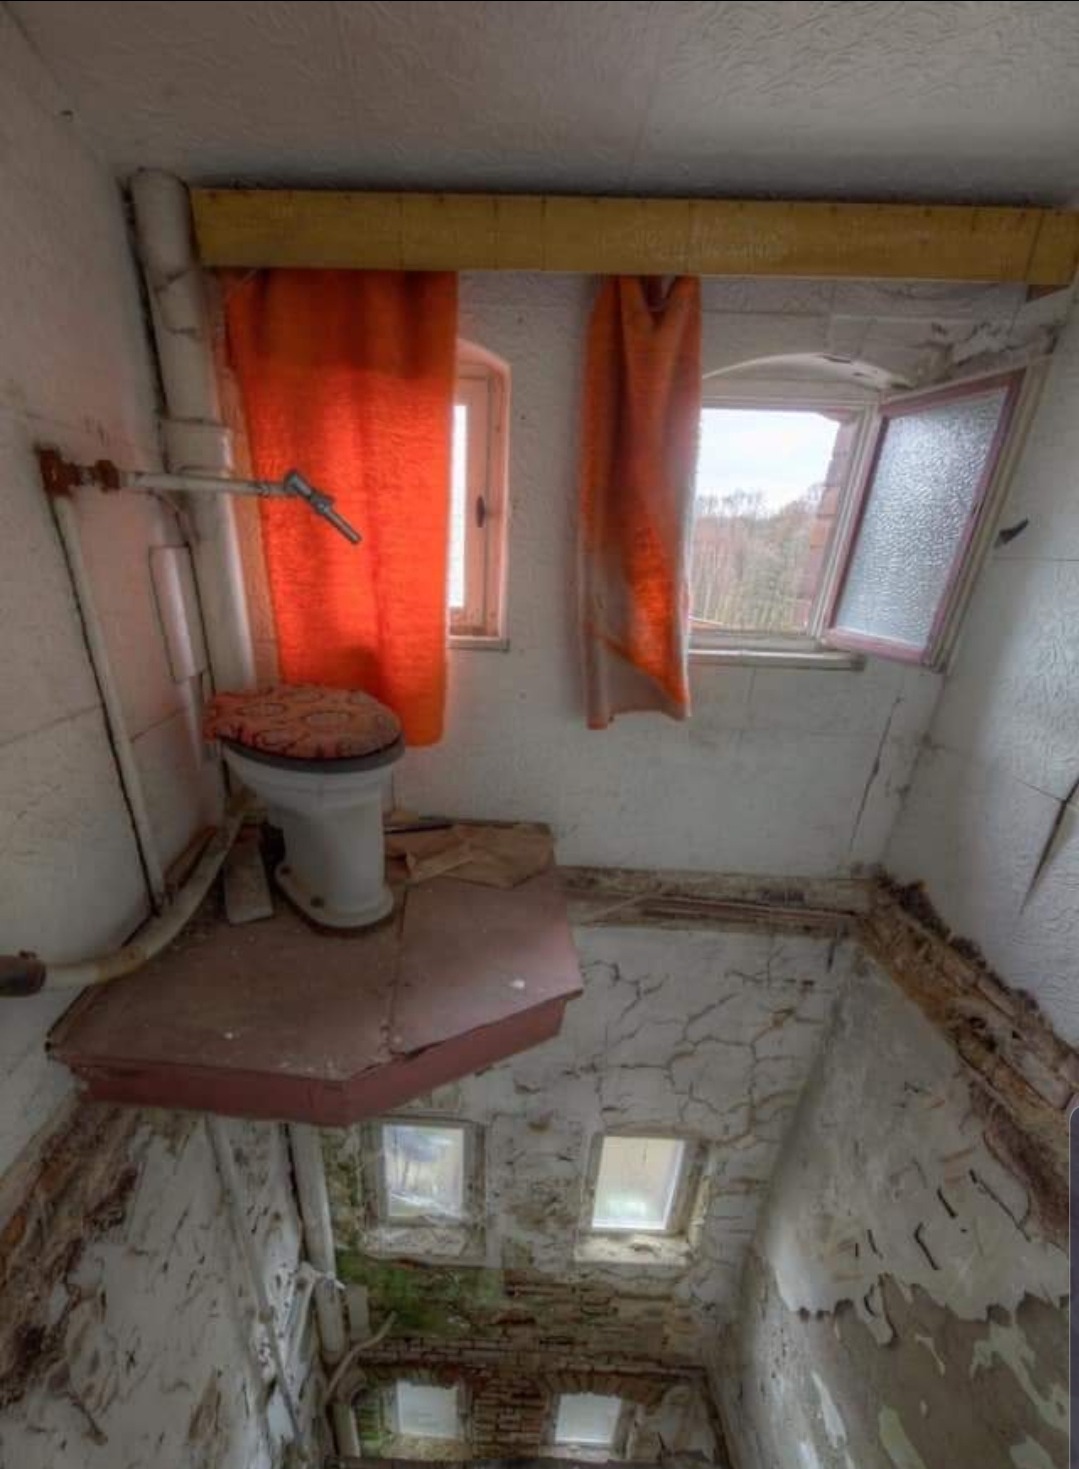 18 Photos Of Deeply Cursed Toilets Around The World That Are Creepy As F Ck Asviral